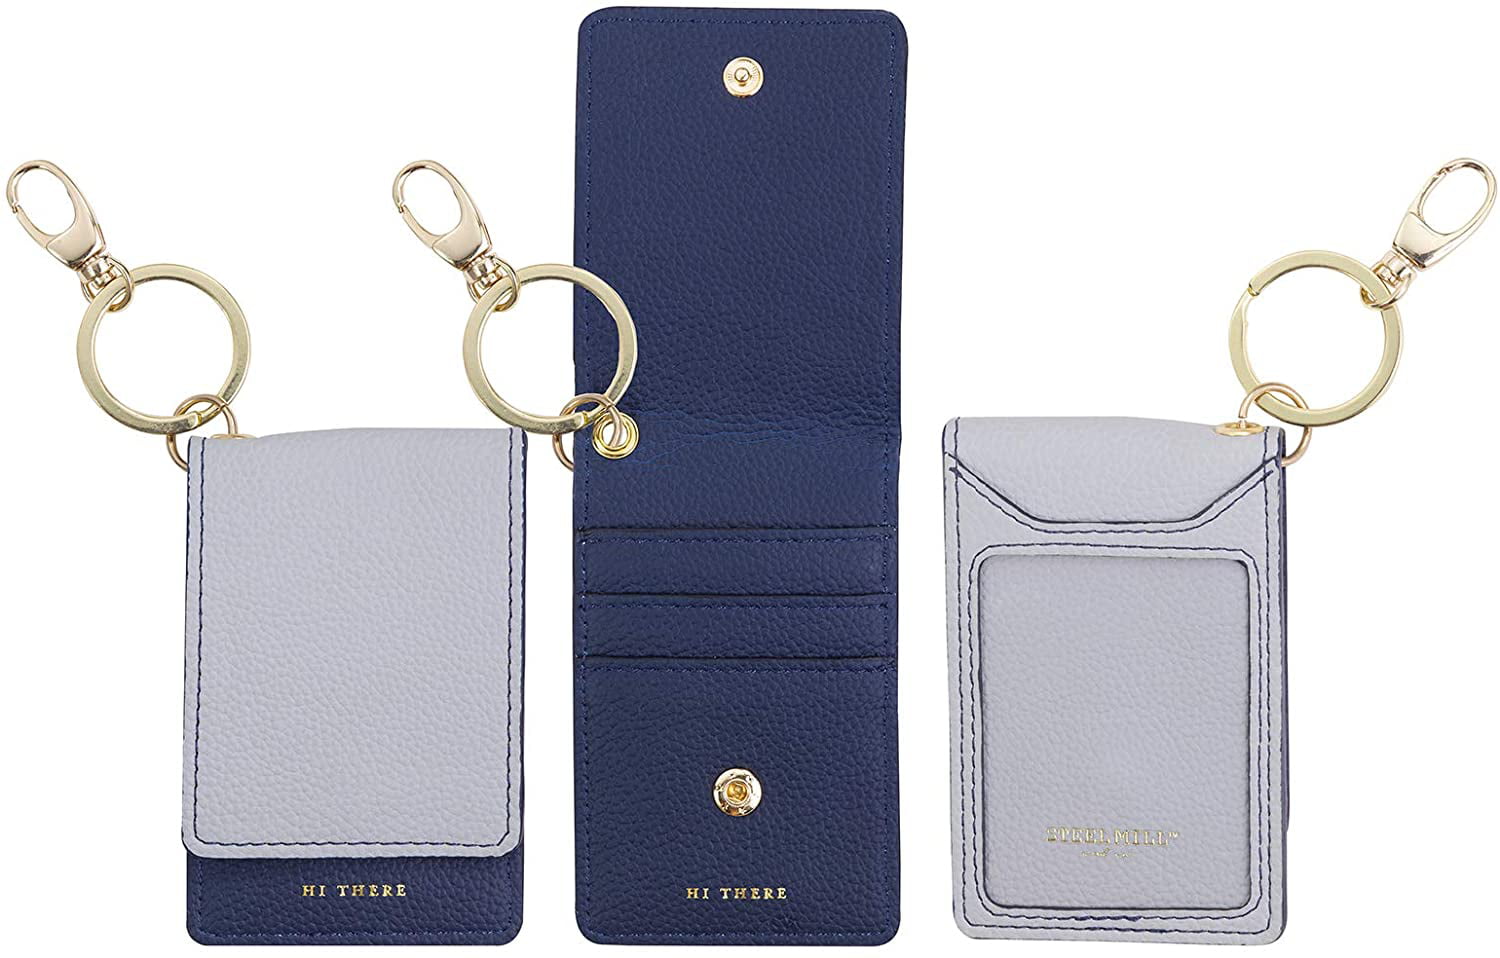 Women Wallet RFID Card Holder Card Case Fashion Credit Card Case with Key Ring Blue 